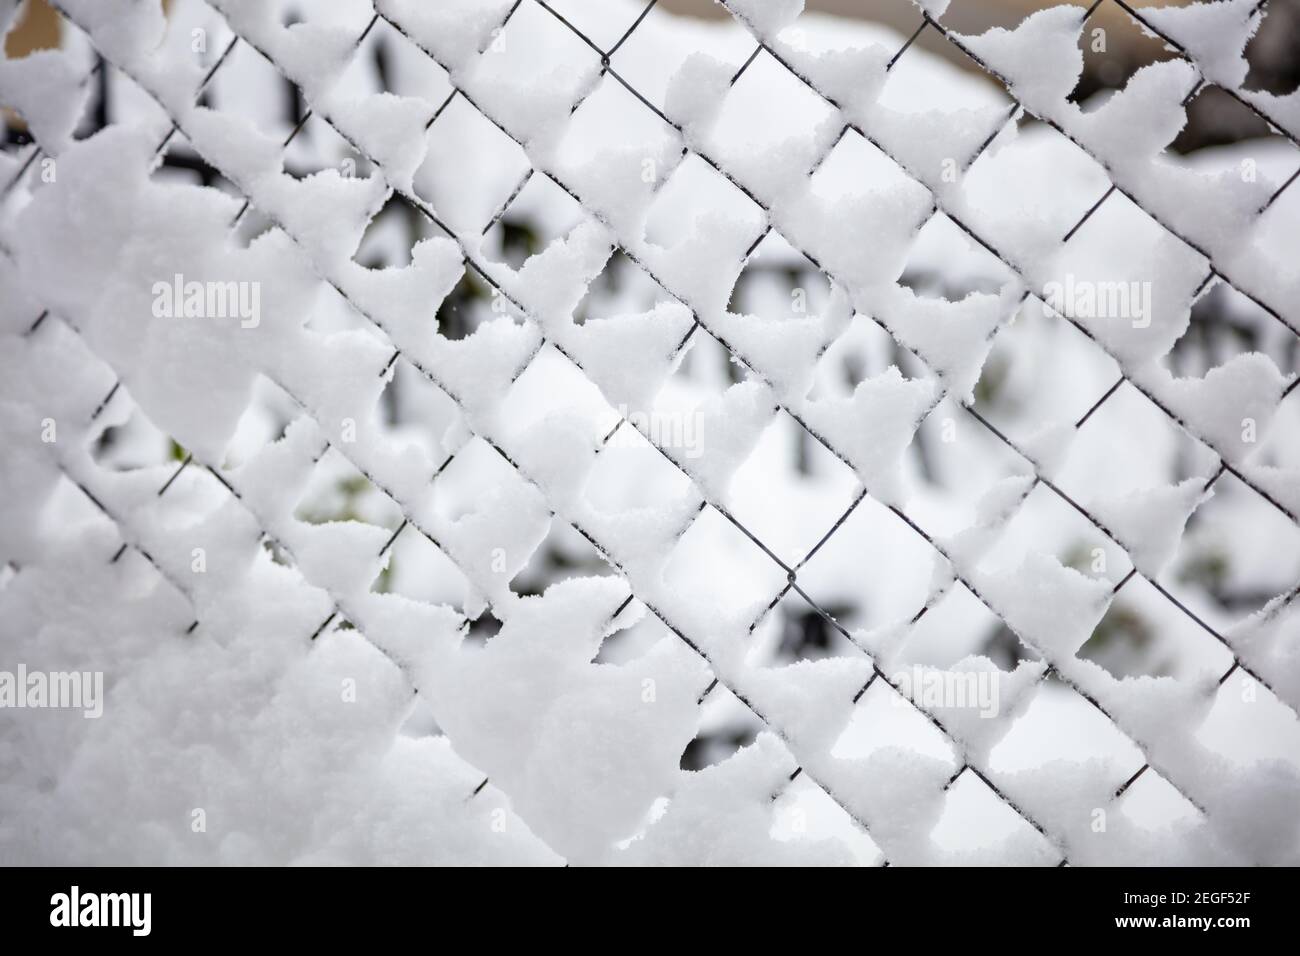 Wire mesh covered with snow, winter seasonal abstract background texture. Metal fence in white wintertime frost. Security, privacy concept Stock Photo